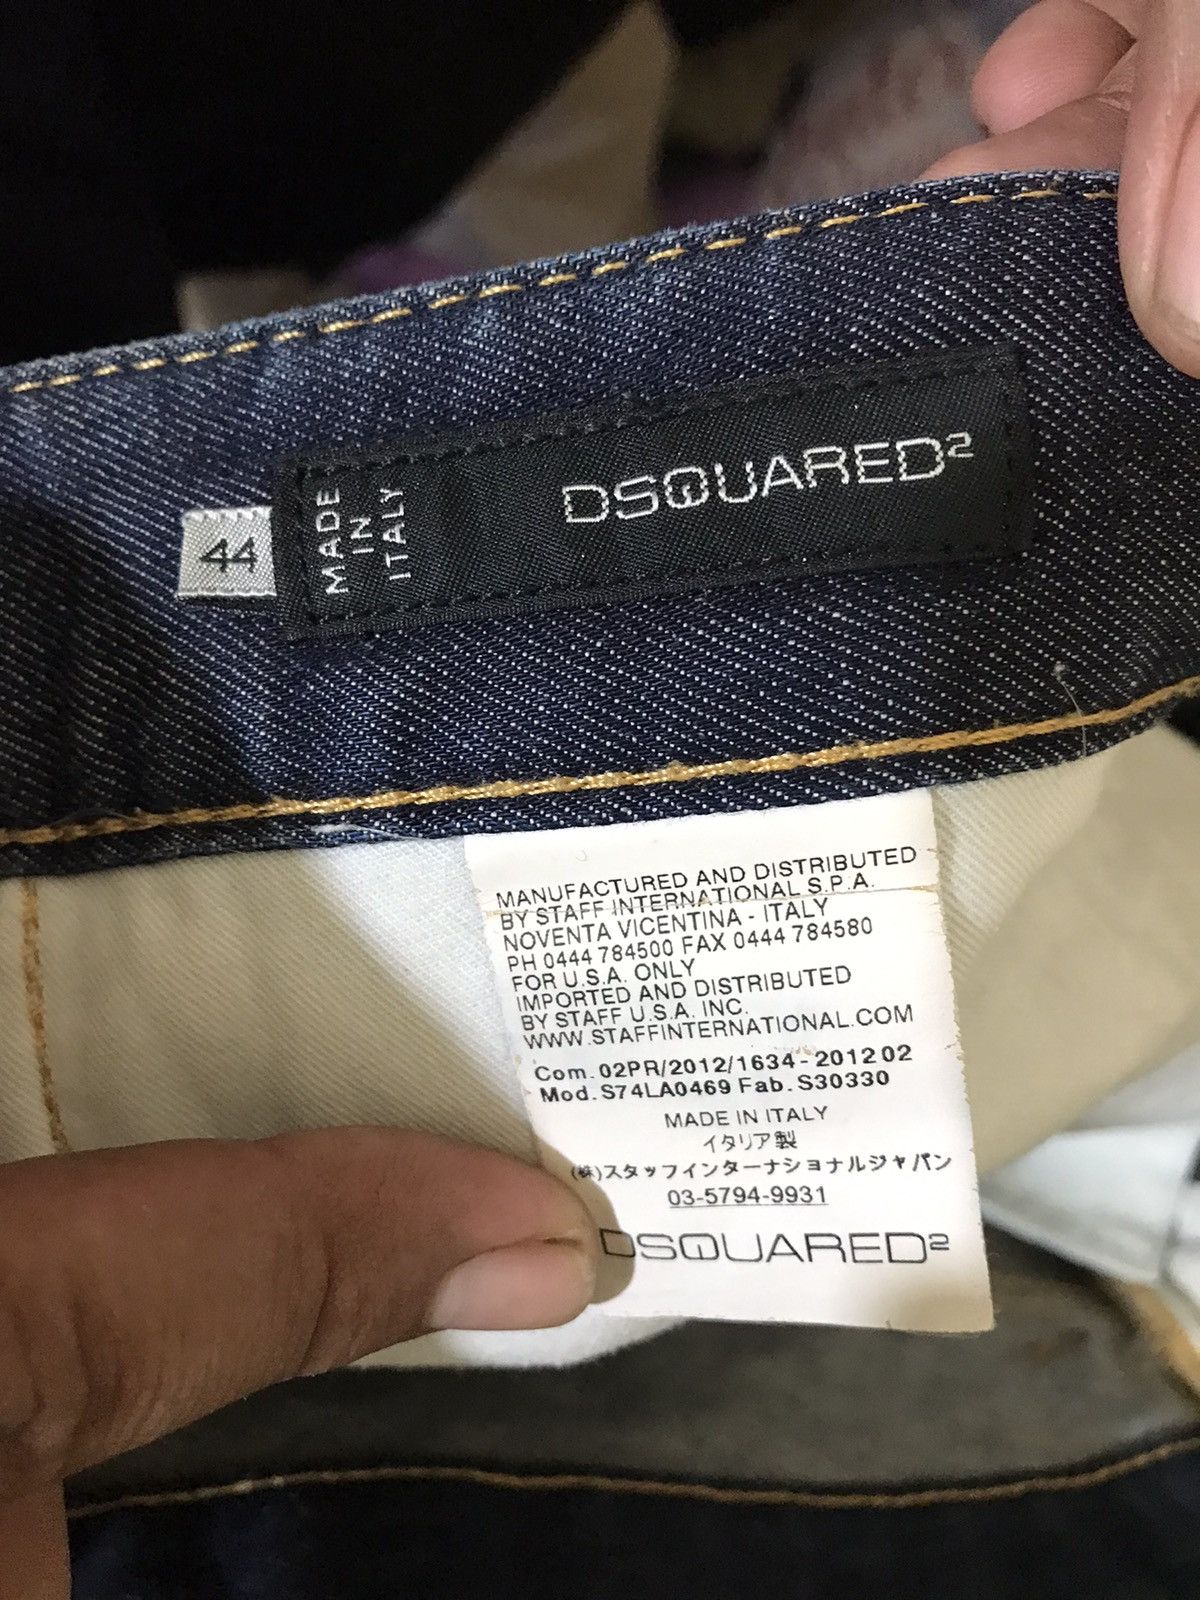 Dsquared2 DSQUARED JEANS MADE IN ITALY SIZE 44 Size US 32 / EU 48 - 3 Preview